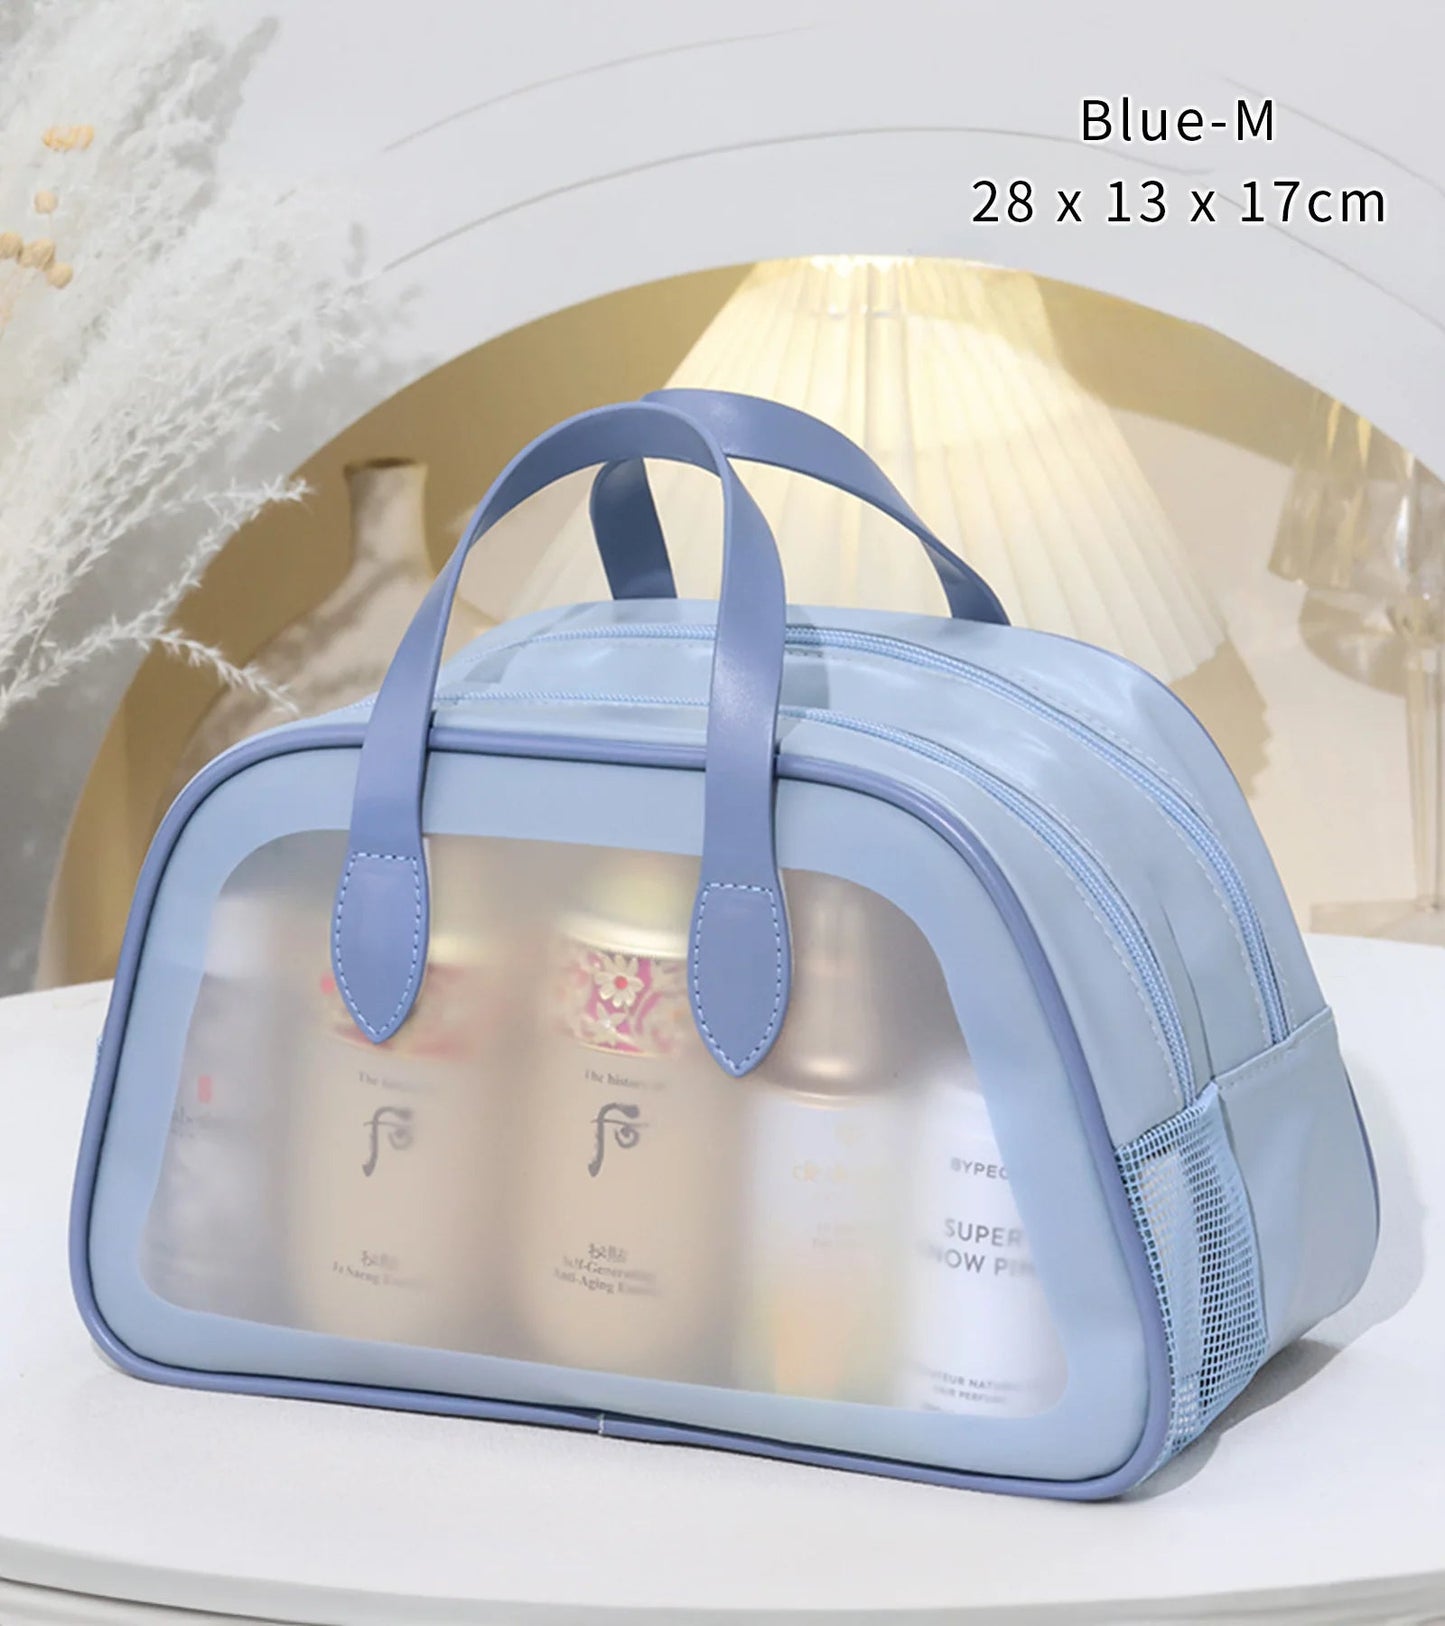 Bath Bag Dry-Wet Separation Partition Toiletry Bag Portable PVC Double-Layer Cosmetic Bag for Travel, Beach, Pool Bathing - LESSANA